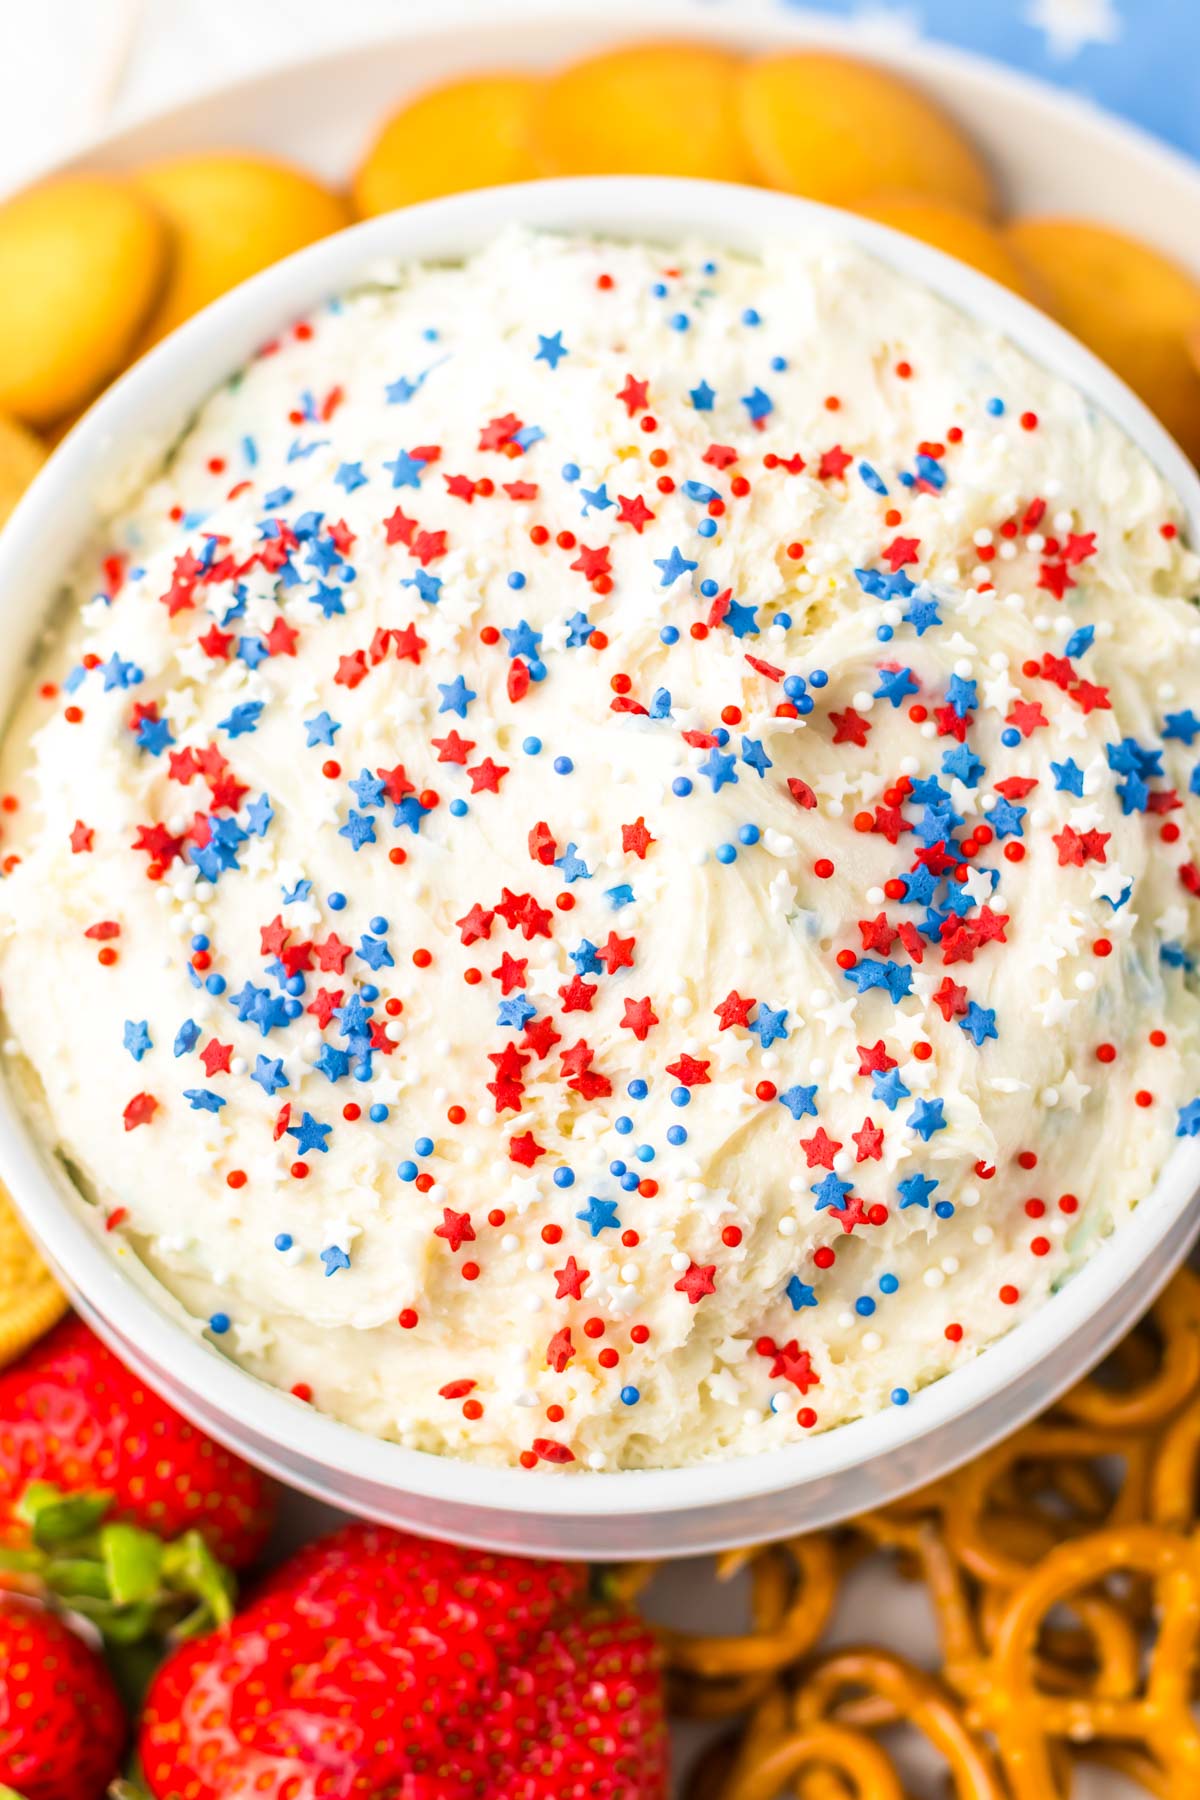 close up view of the completed funfetti cake batter dip served in a white bowl.